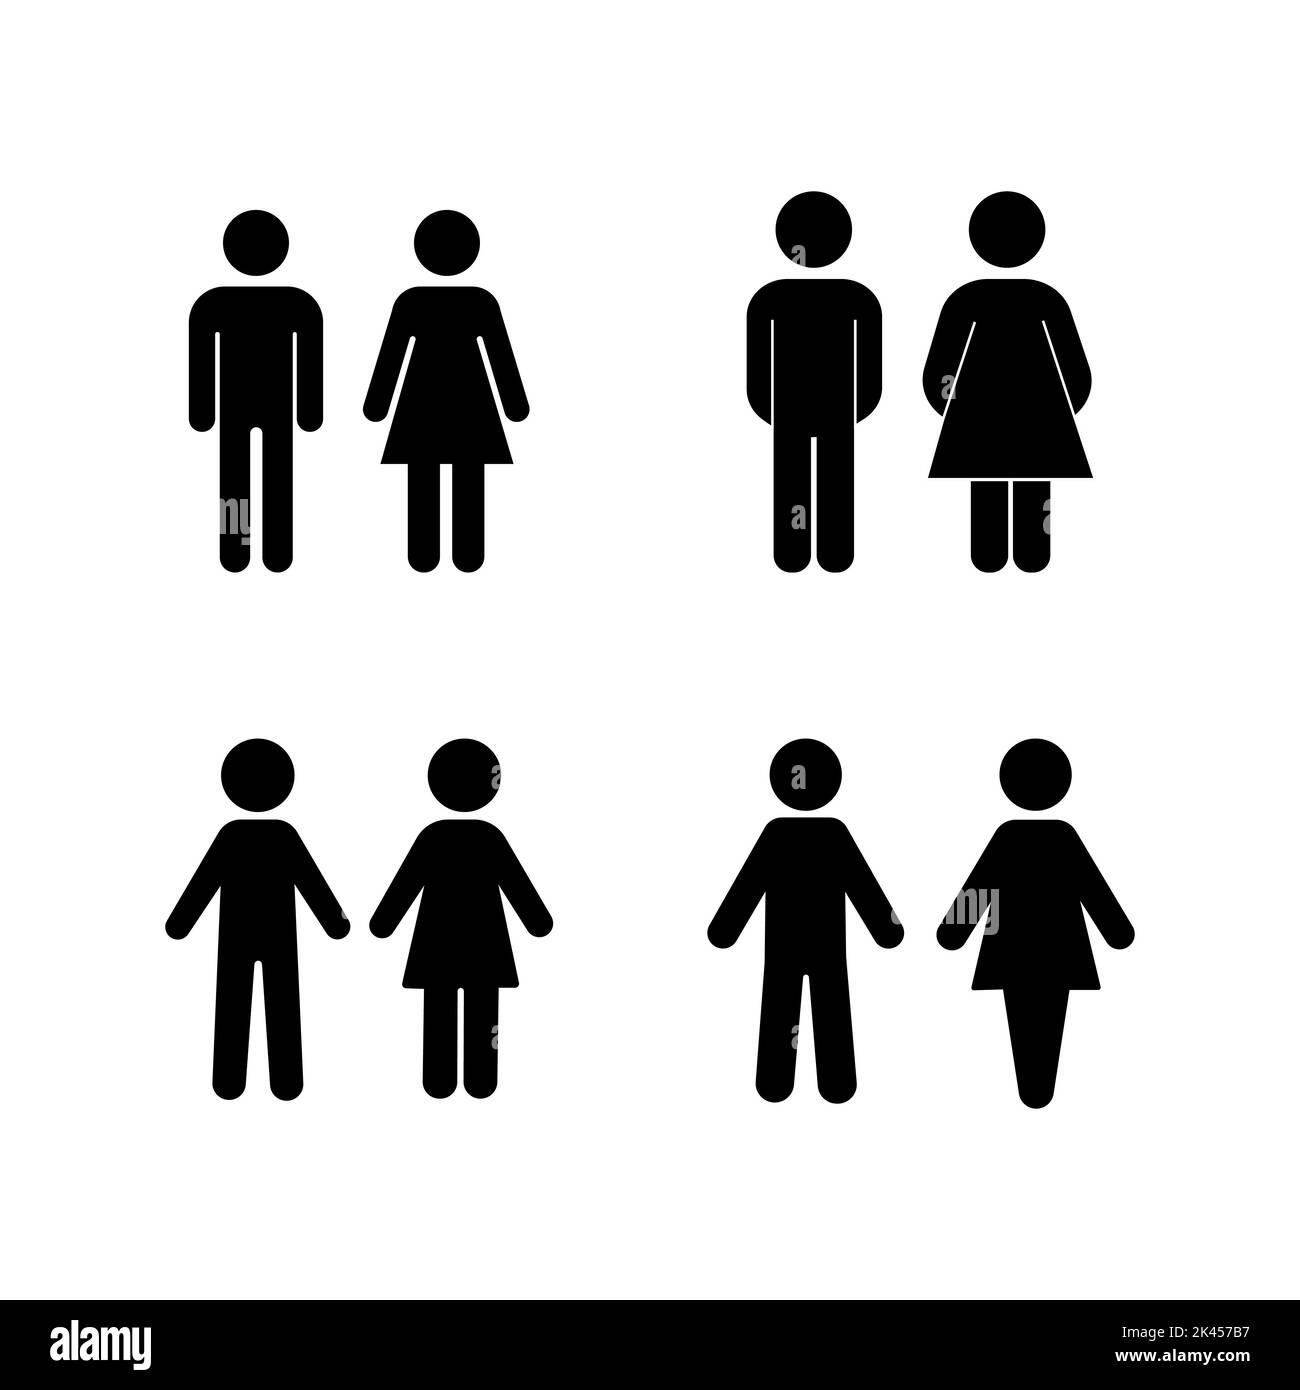 Man and woman person avatar icon set. Male and female gender profile symbol. Men and women wc logo. Toilet and bathroom sign. Black silhouette isolate Stock Vector